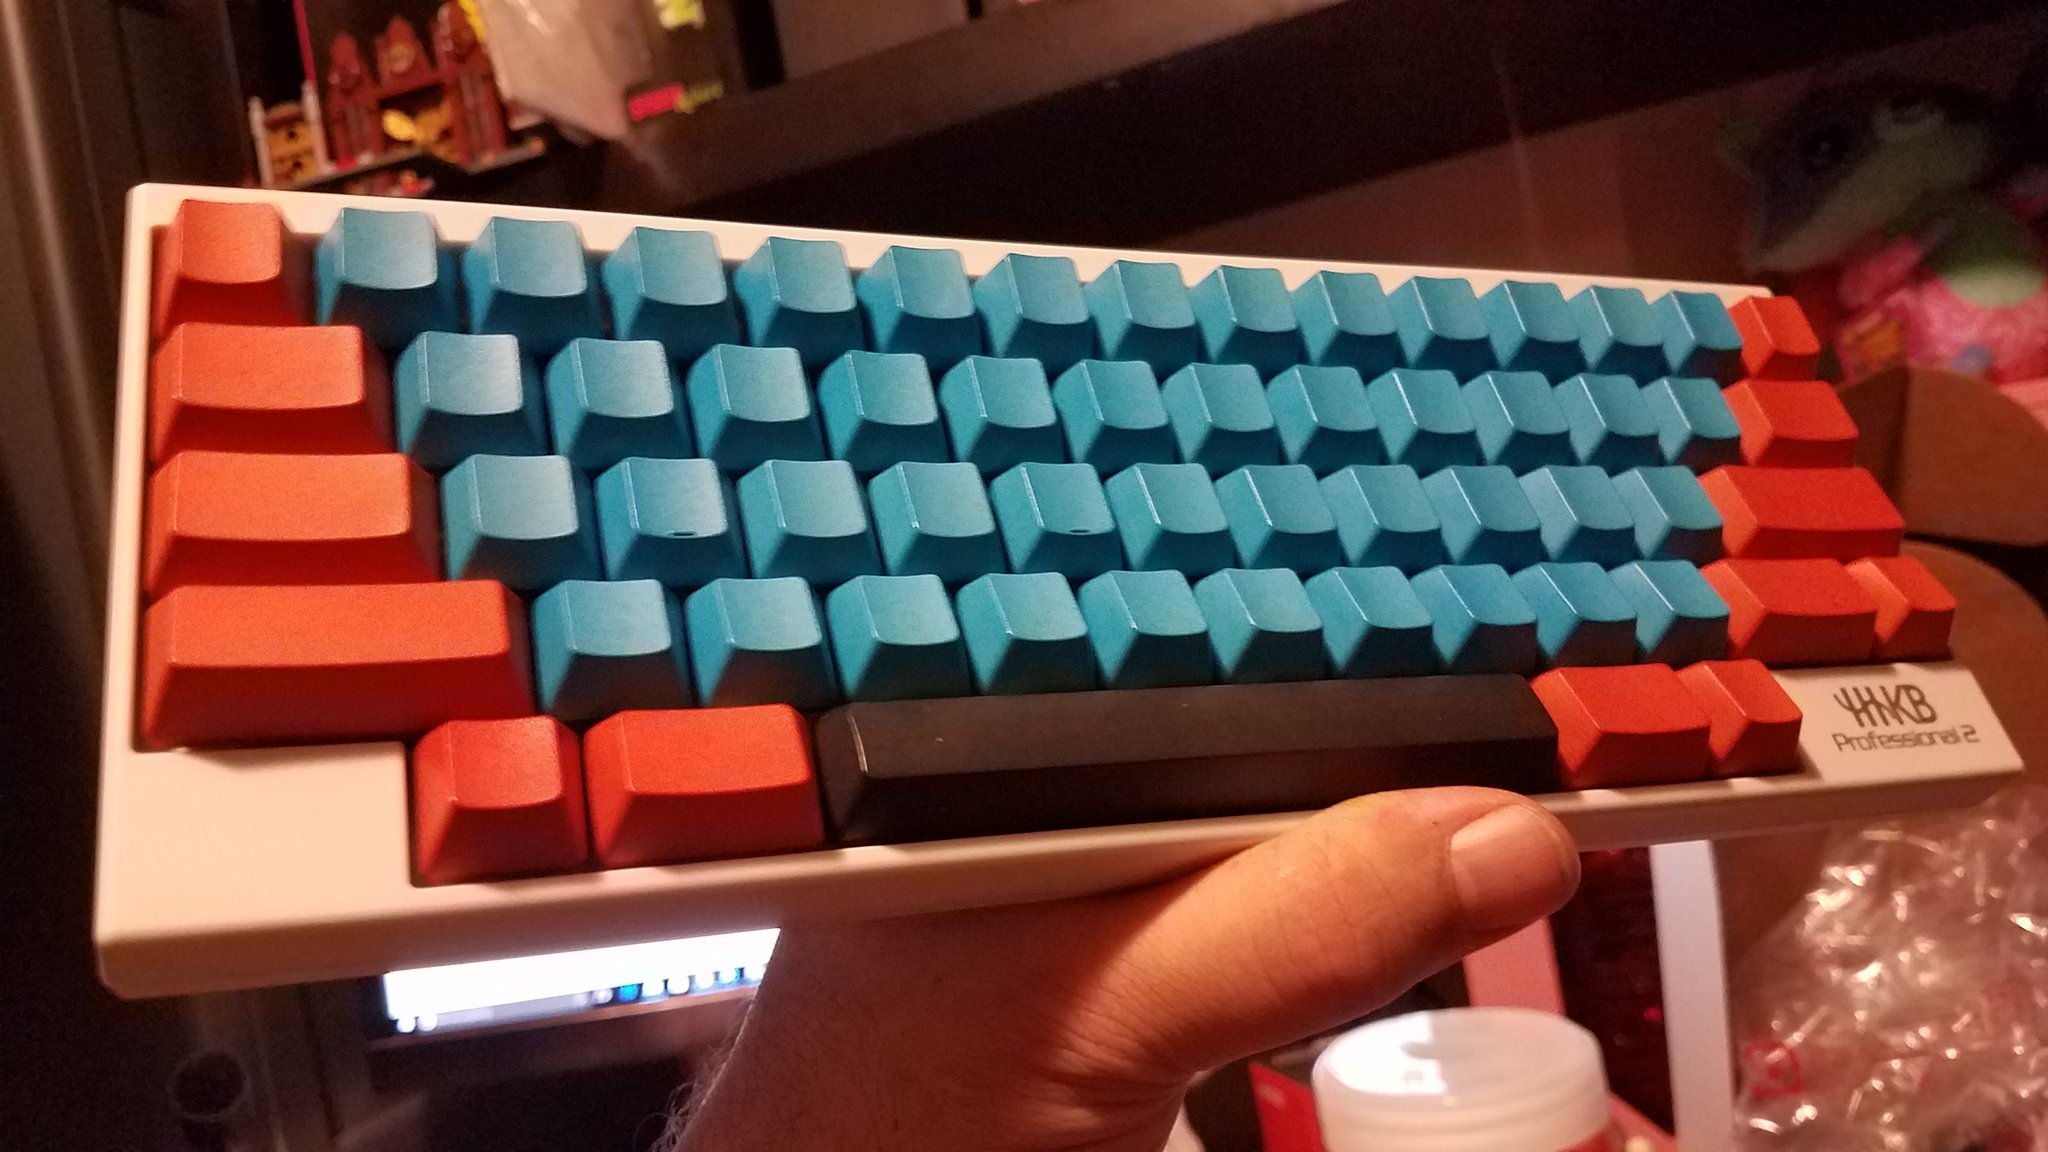 Swapping Keycaps Is The Key To Having A Pretty Keyboard